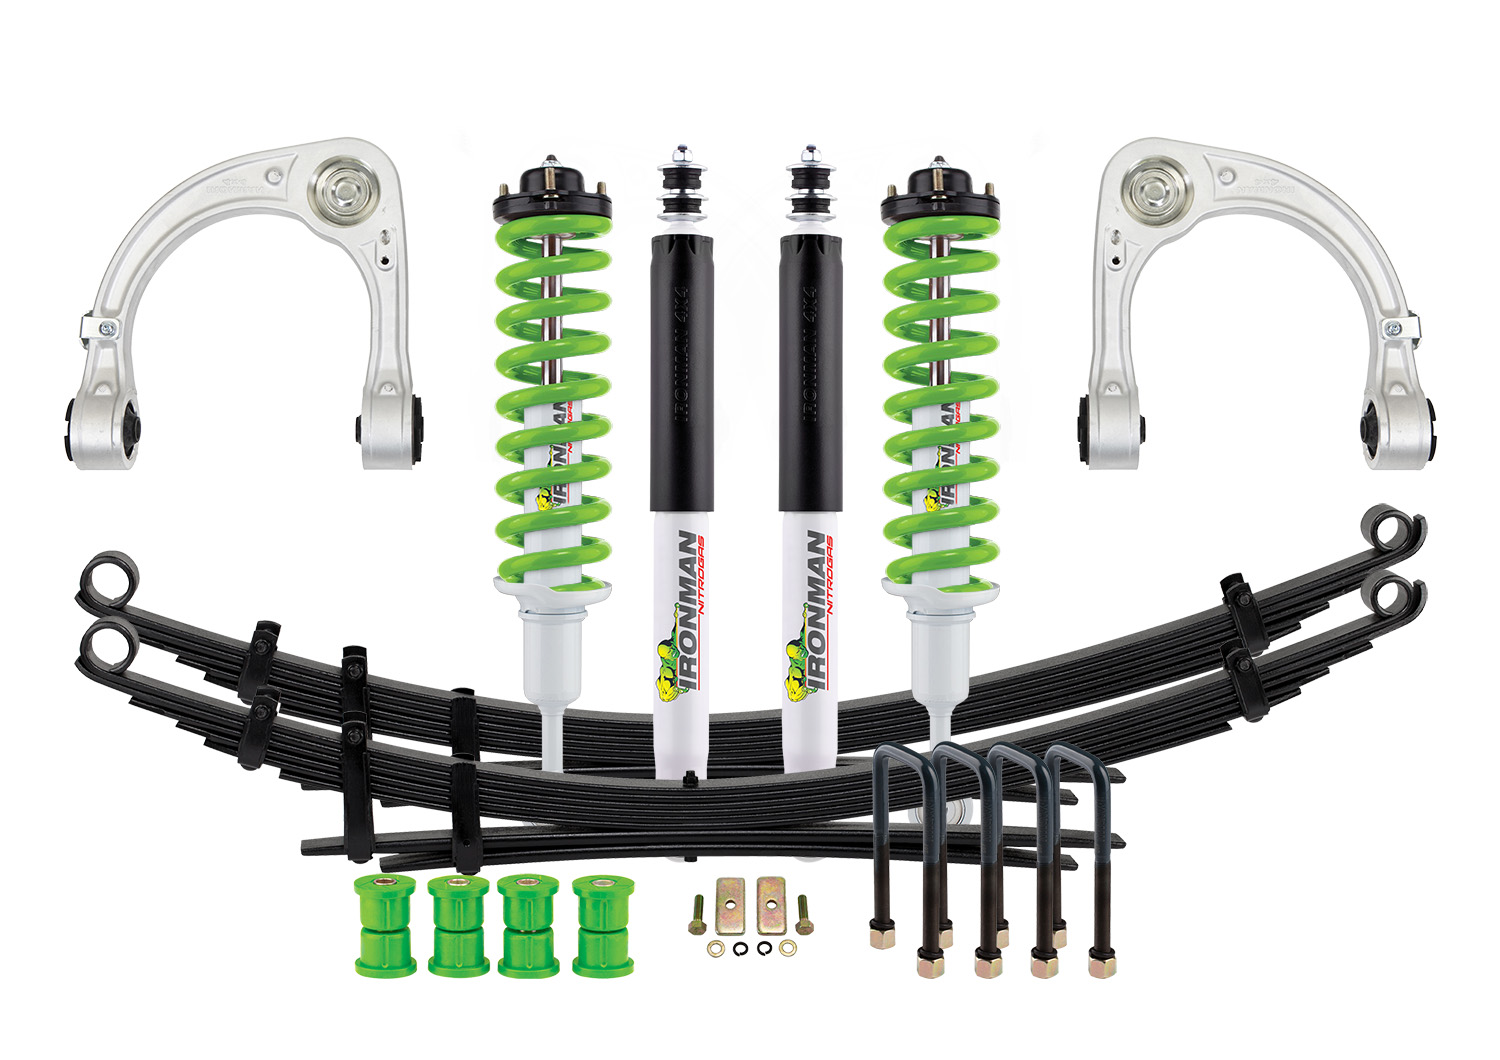 Nitro Gas Suspension Kit Suited for Toyota Tacoma 2005+ - Stage 2 Questions & Answers